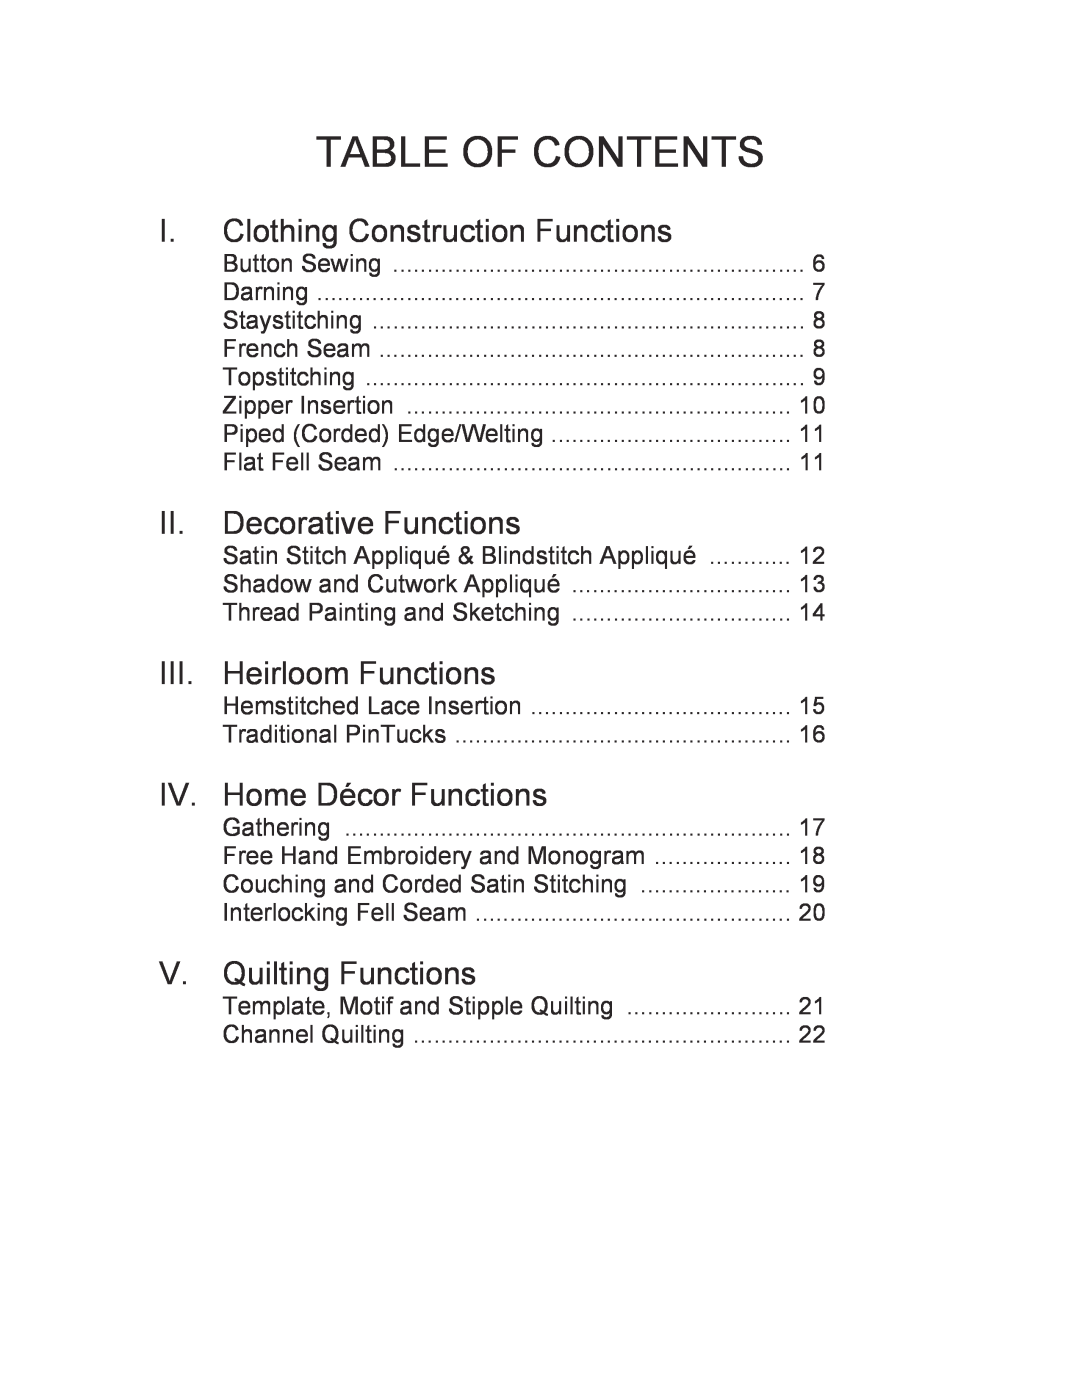 Singer 27 manual Table Of Contents, I. Clothing Construction Functions, Decorative Functions, Heirloom Functions 